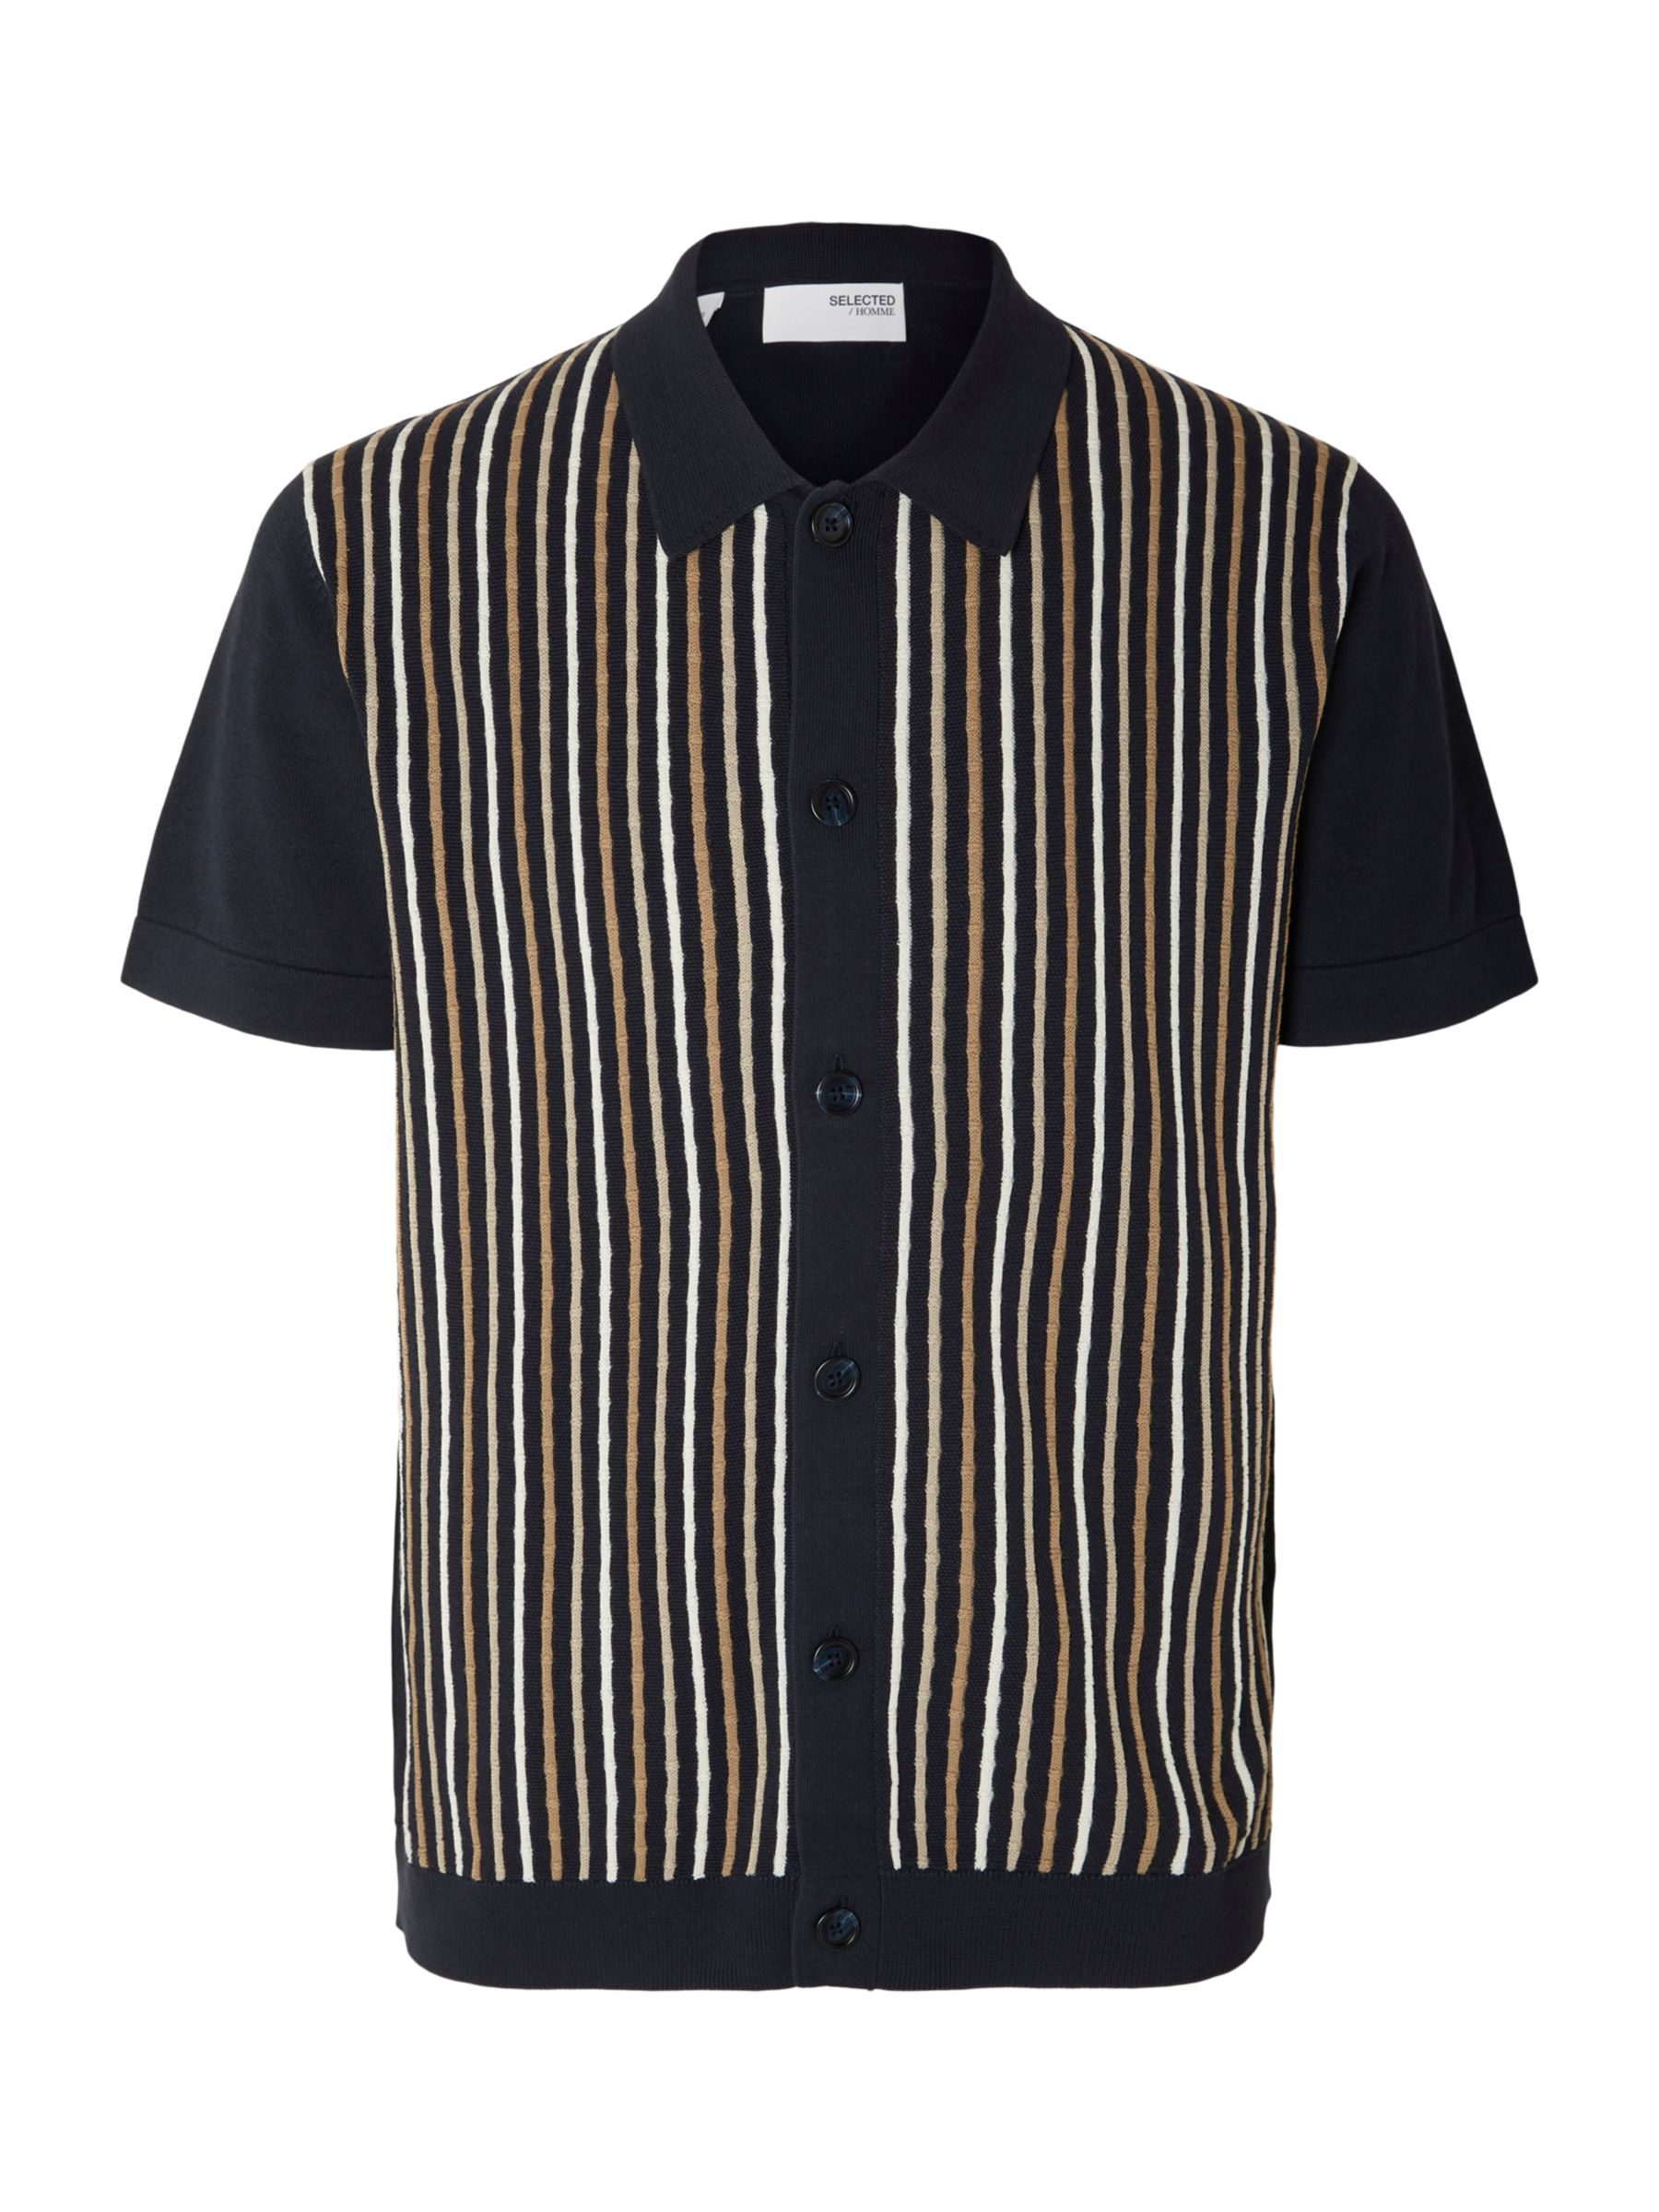 Buy SELECTED HOMME Stripe Short Sleeve Polo Cardigan, Sky Captain Online at johnlewis.com